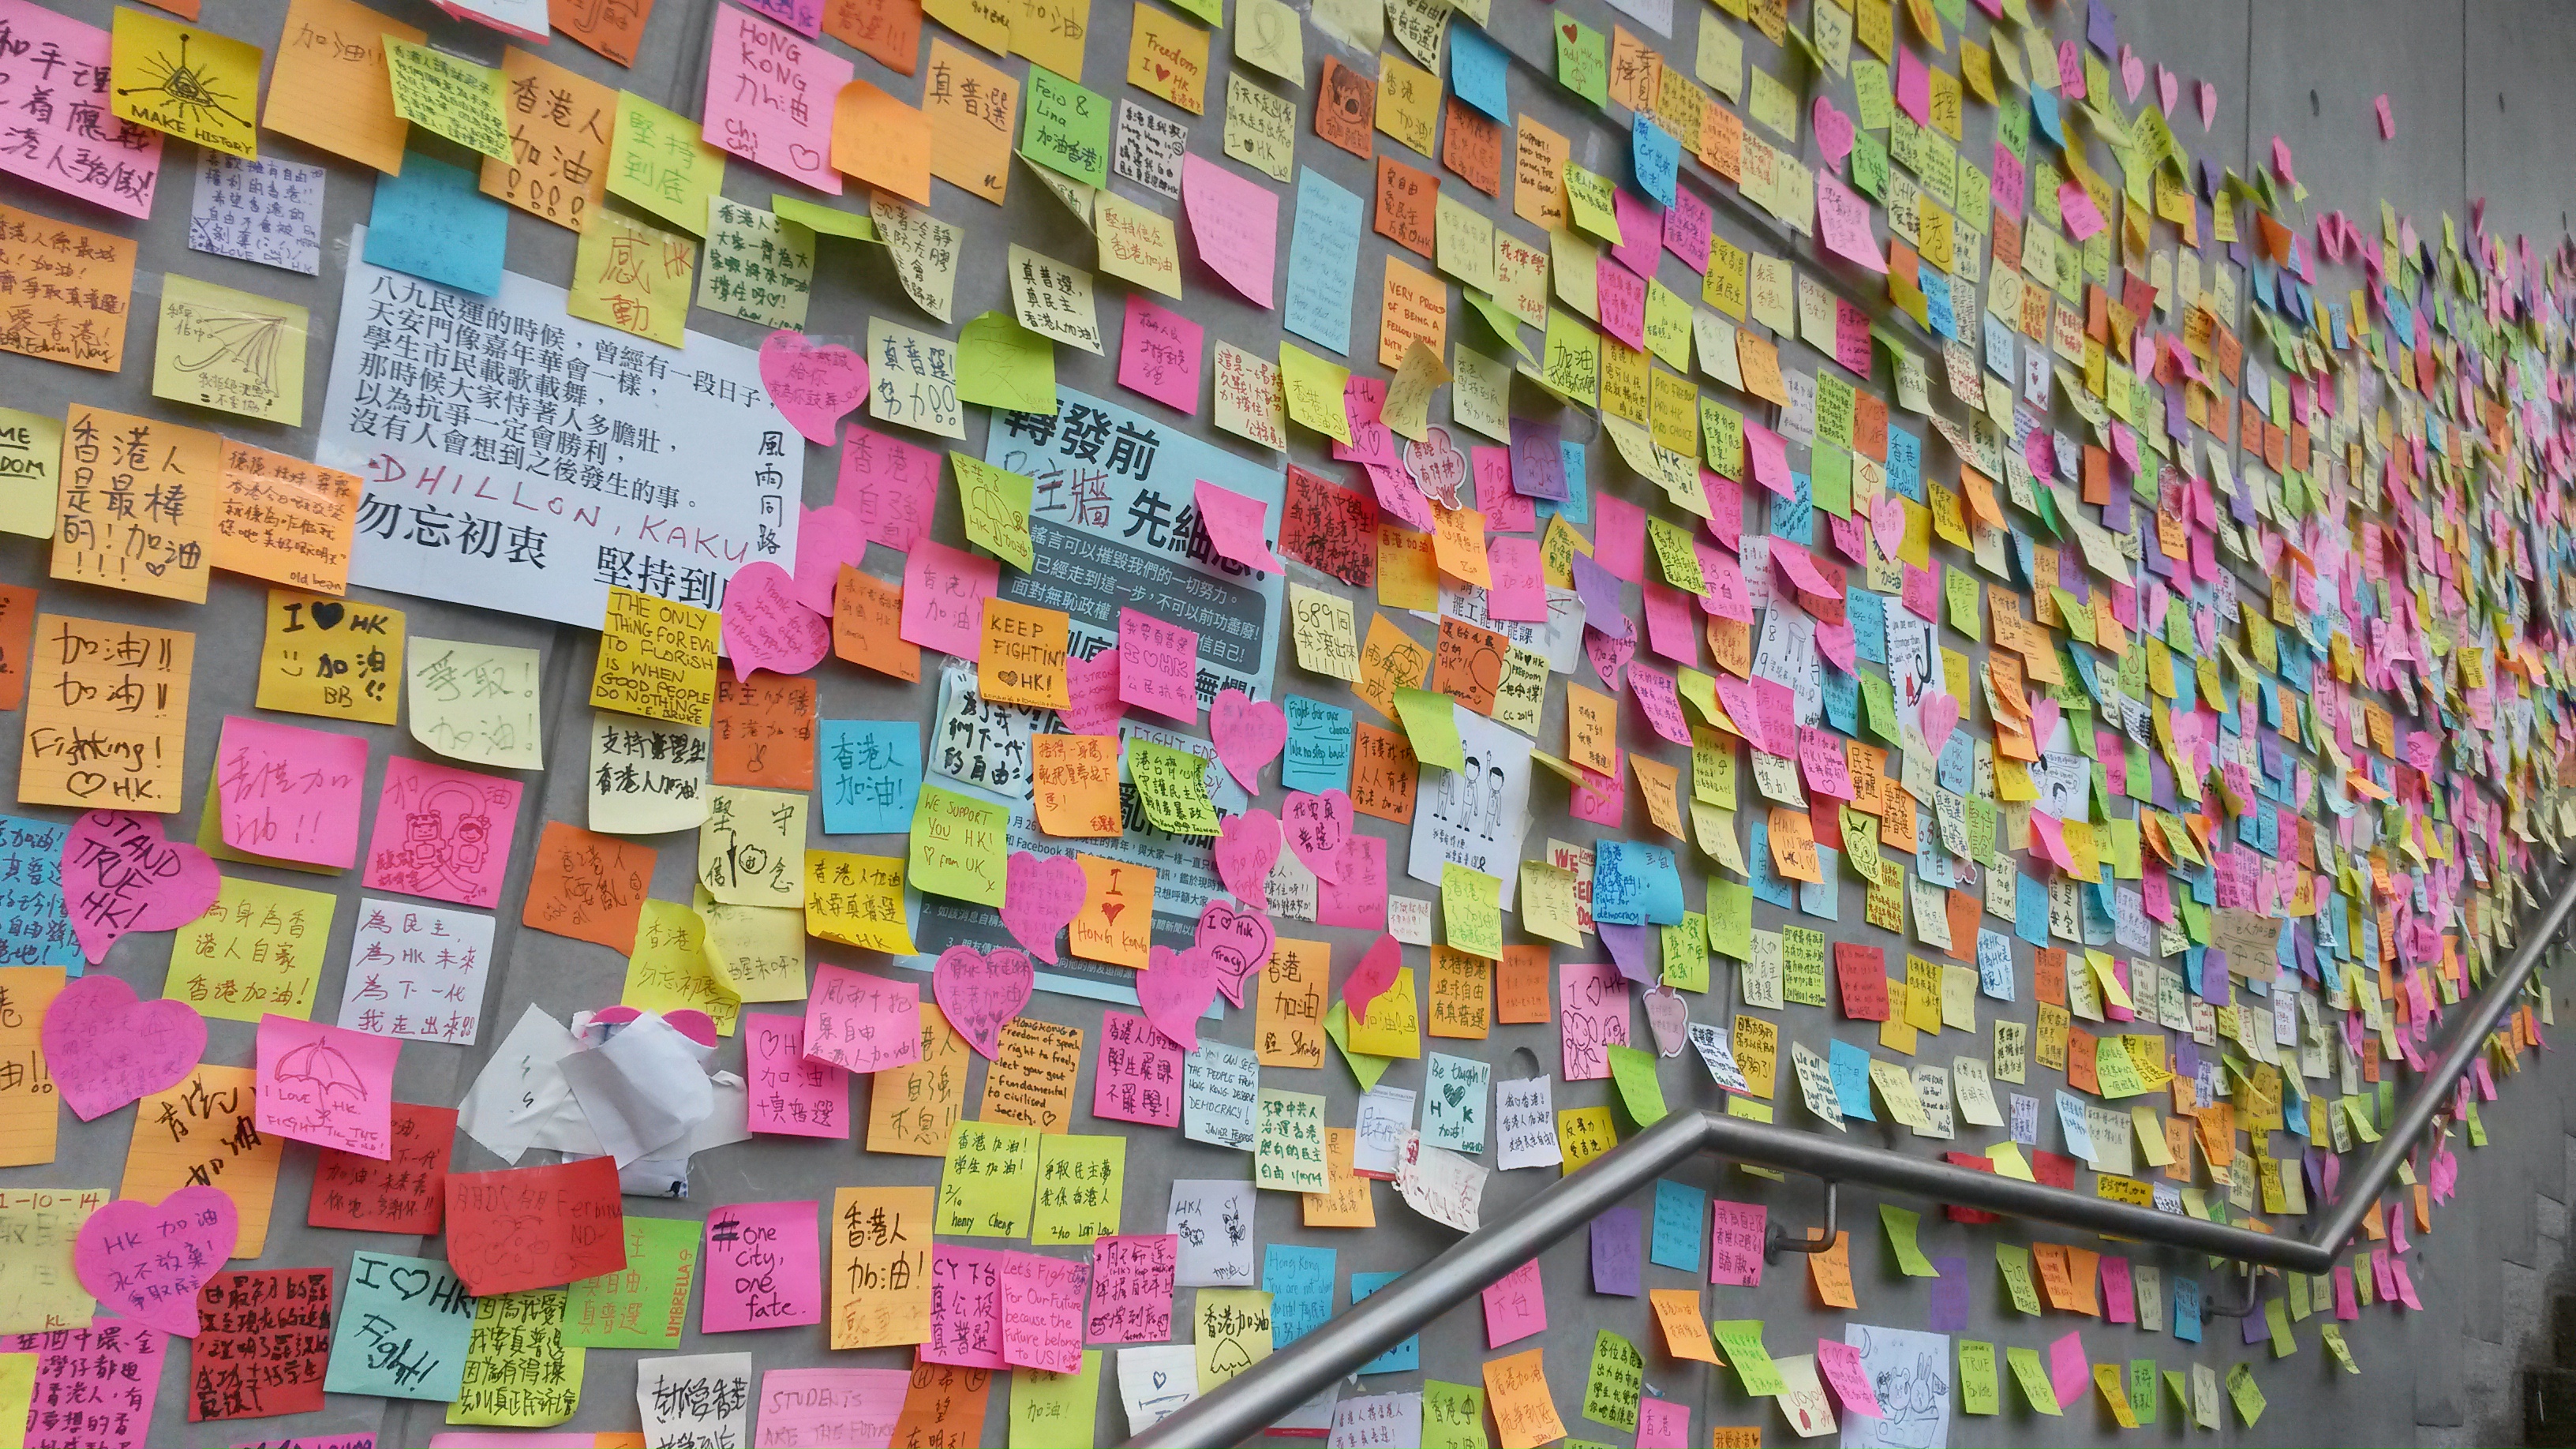 Hong Kong's "democracy wall" where people have written their messages. The stairs in the picture leads up to one of the entrances of the Government HQ.